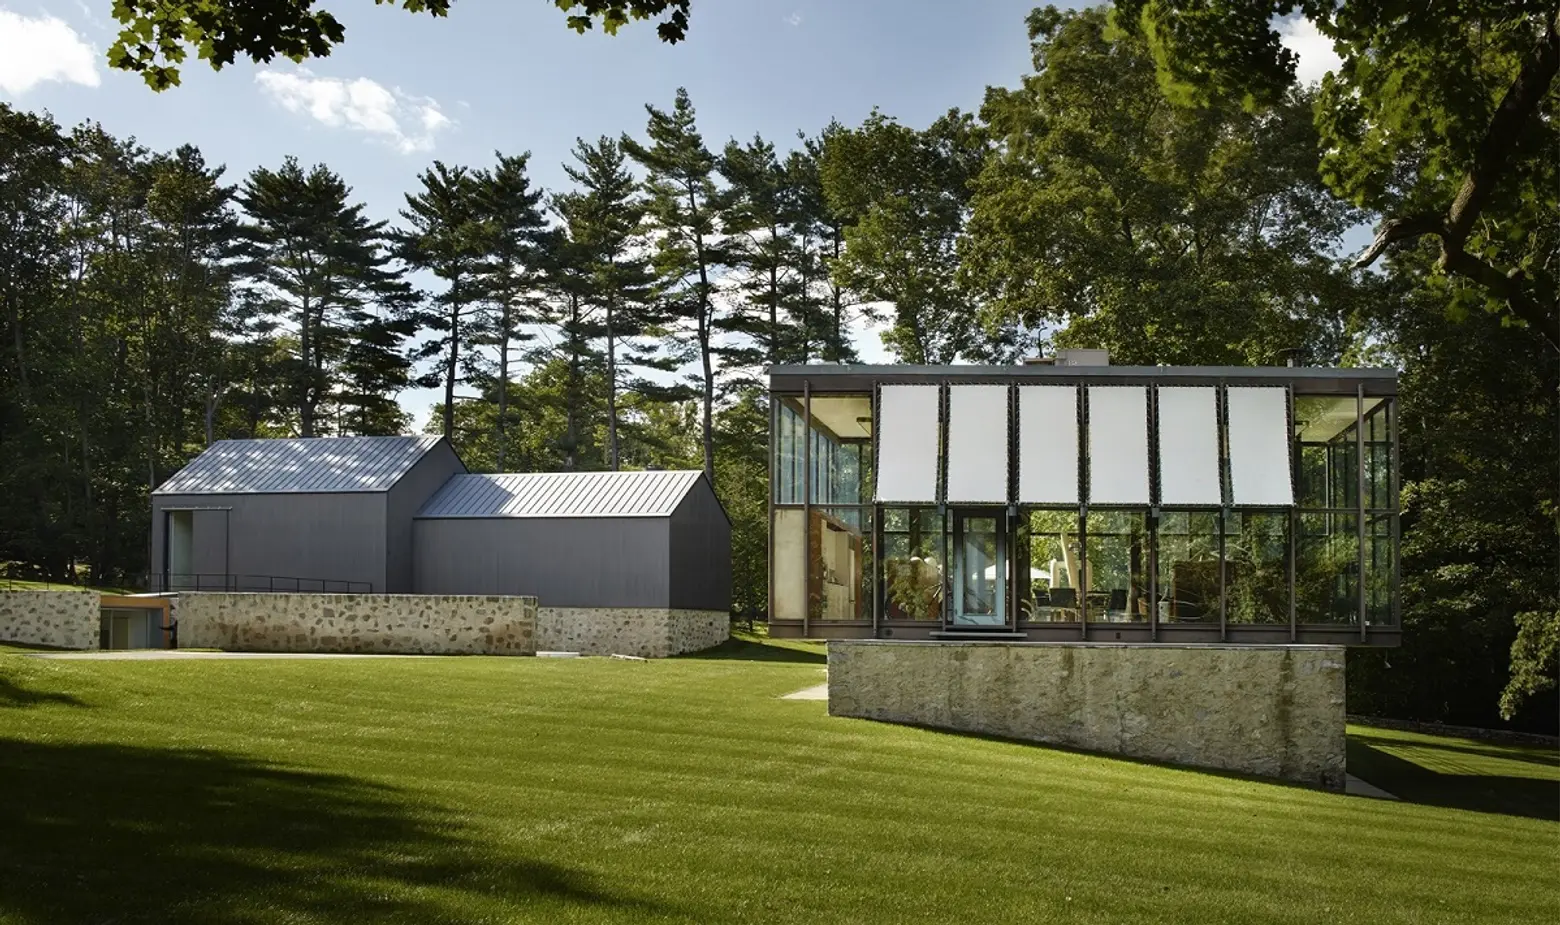 Following a Meticulous Renovation, Philip Johnson’s Wiley House Is on the Market for $14M